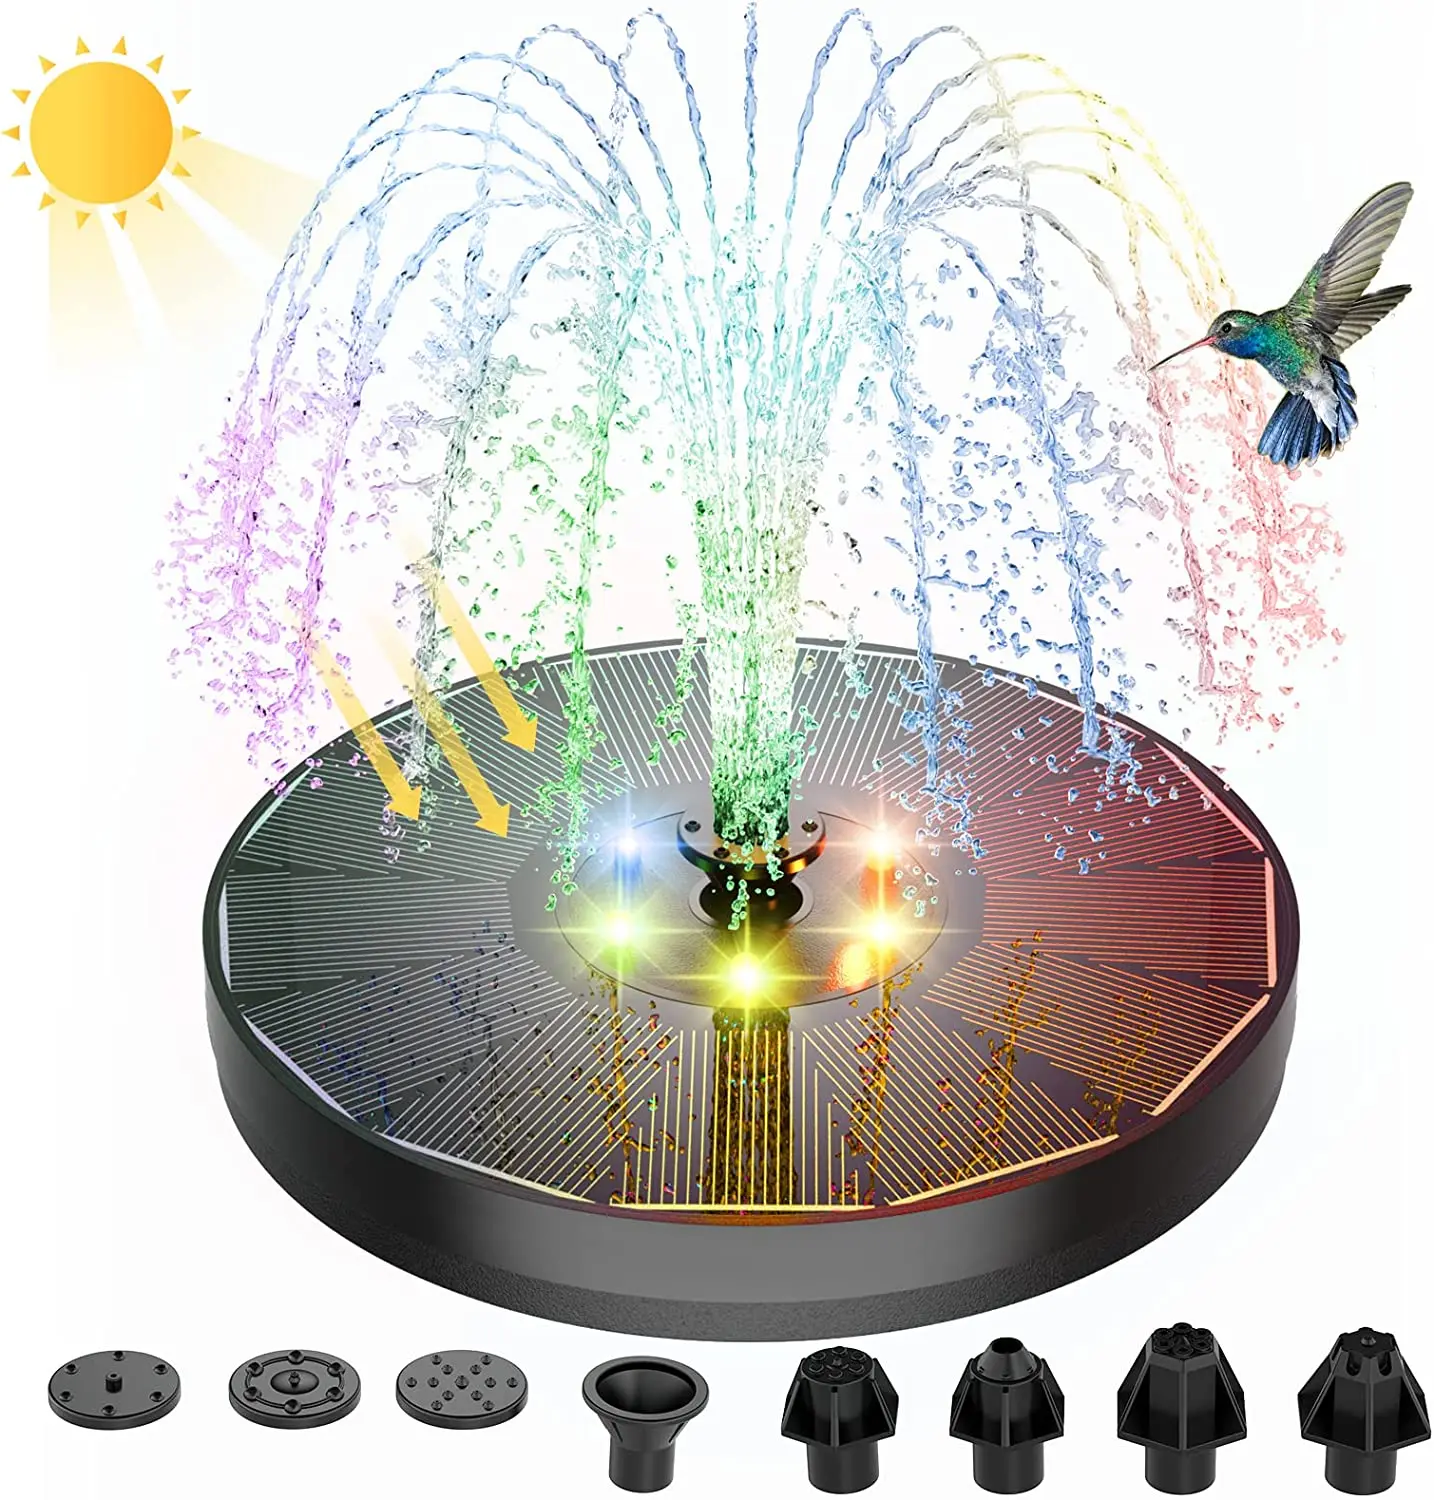 

Water Pump with color LED Lights for Bird Bath 3W with 7 Nozzles & 4 Fixers Floating Garden Pond Tank Solar Fountain